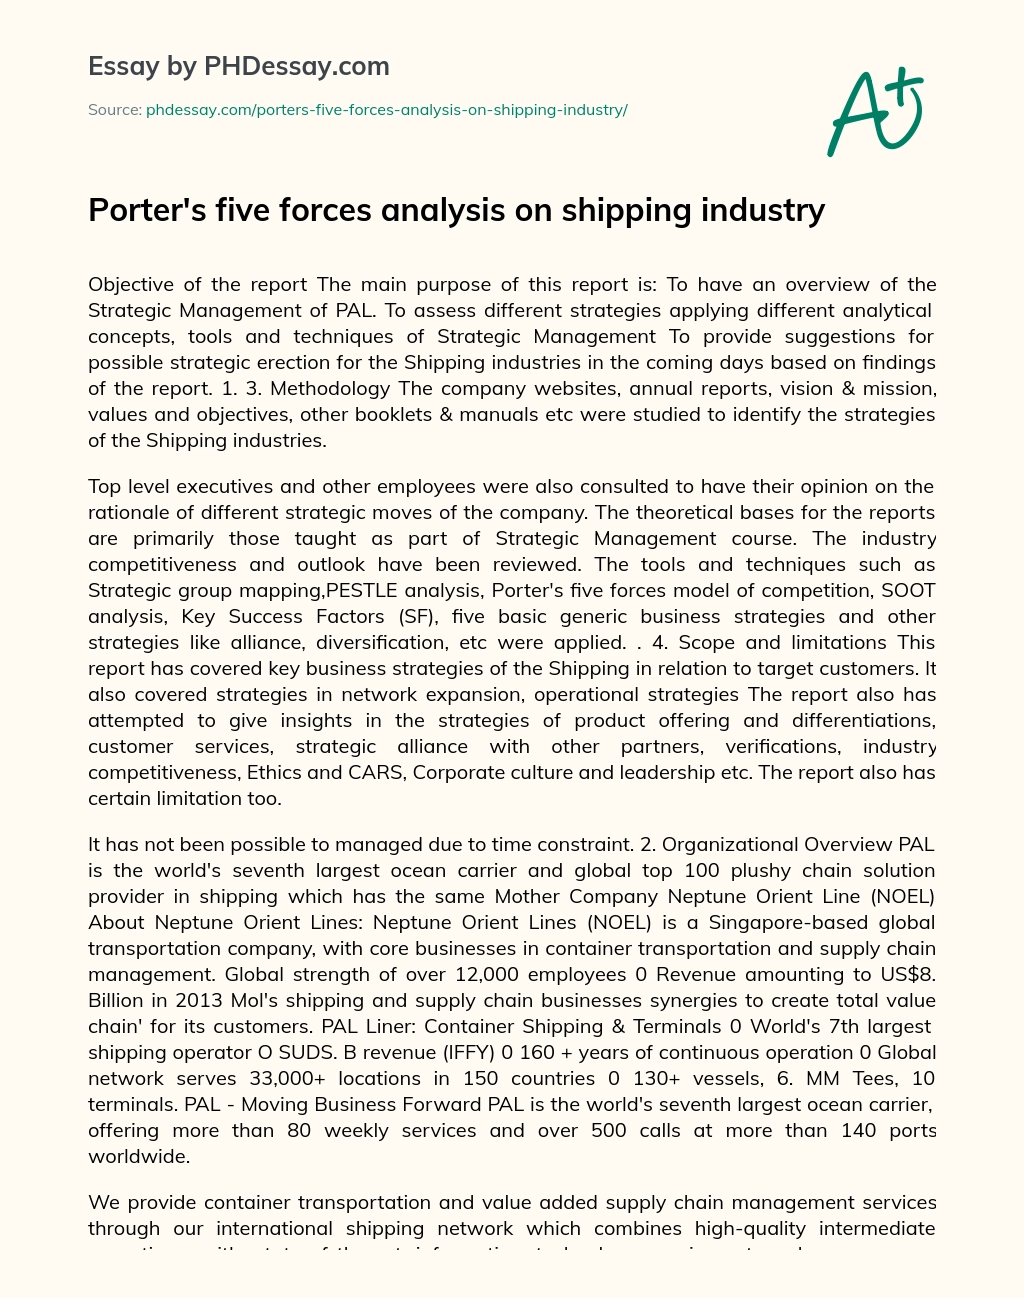 Porter’s five forces analysis on shipping industry essay